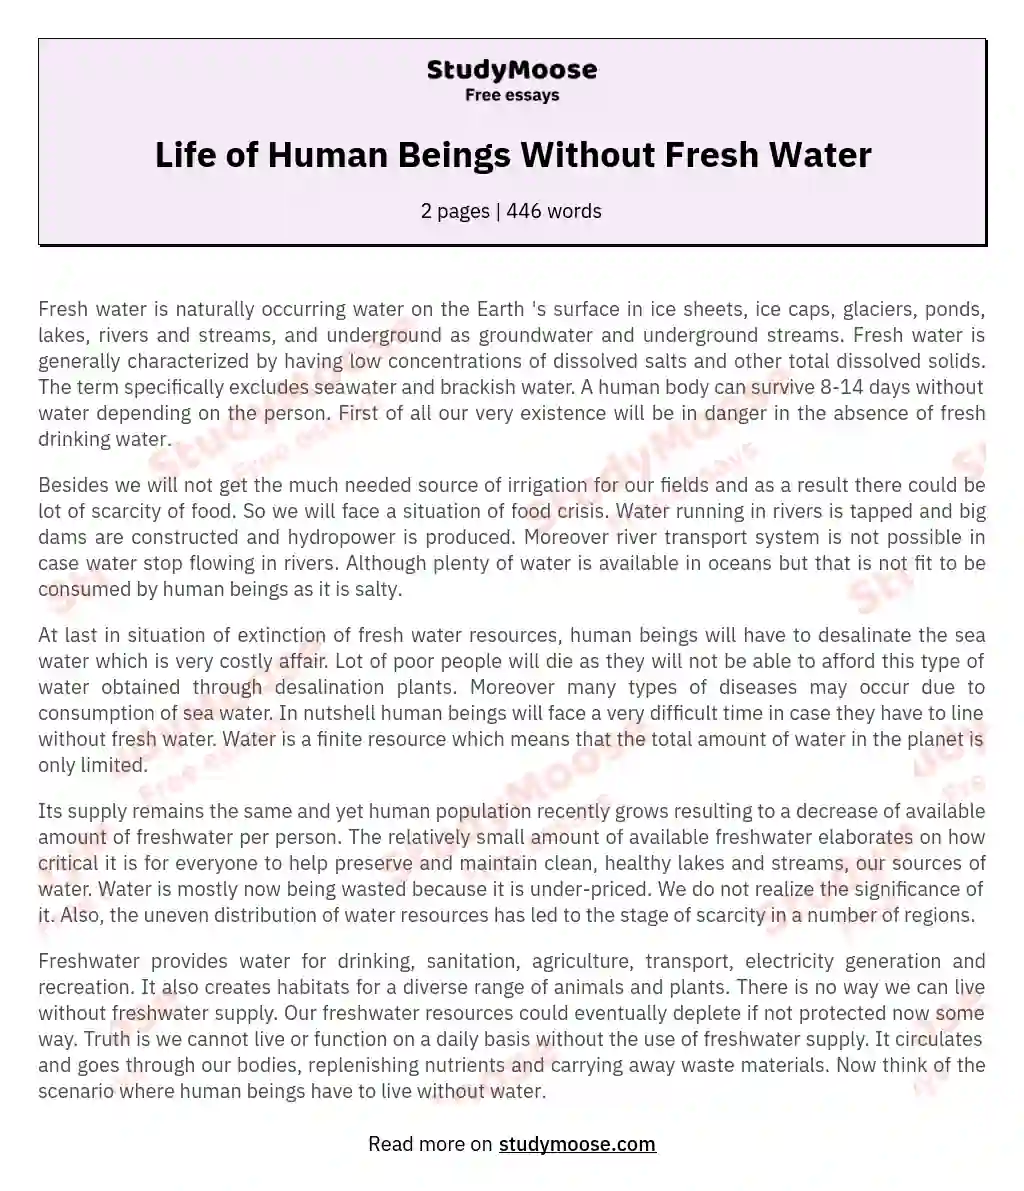 Life of Human Beings Without Fresh Water essay